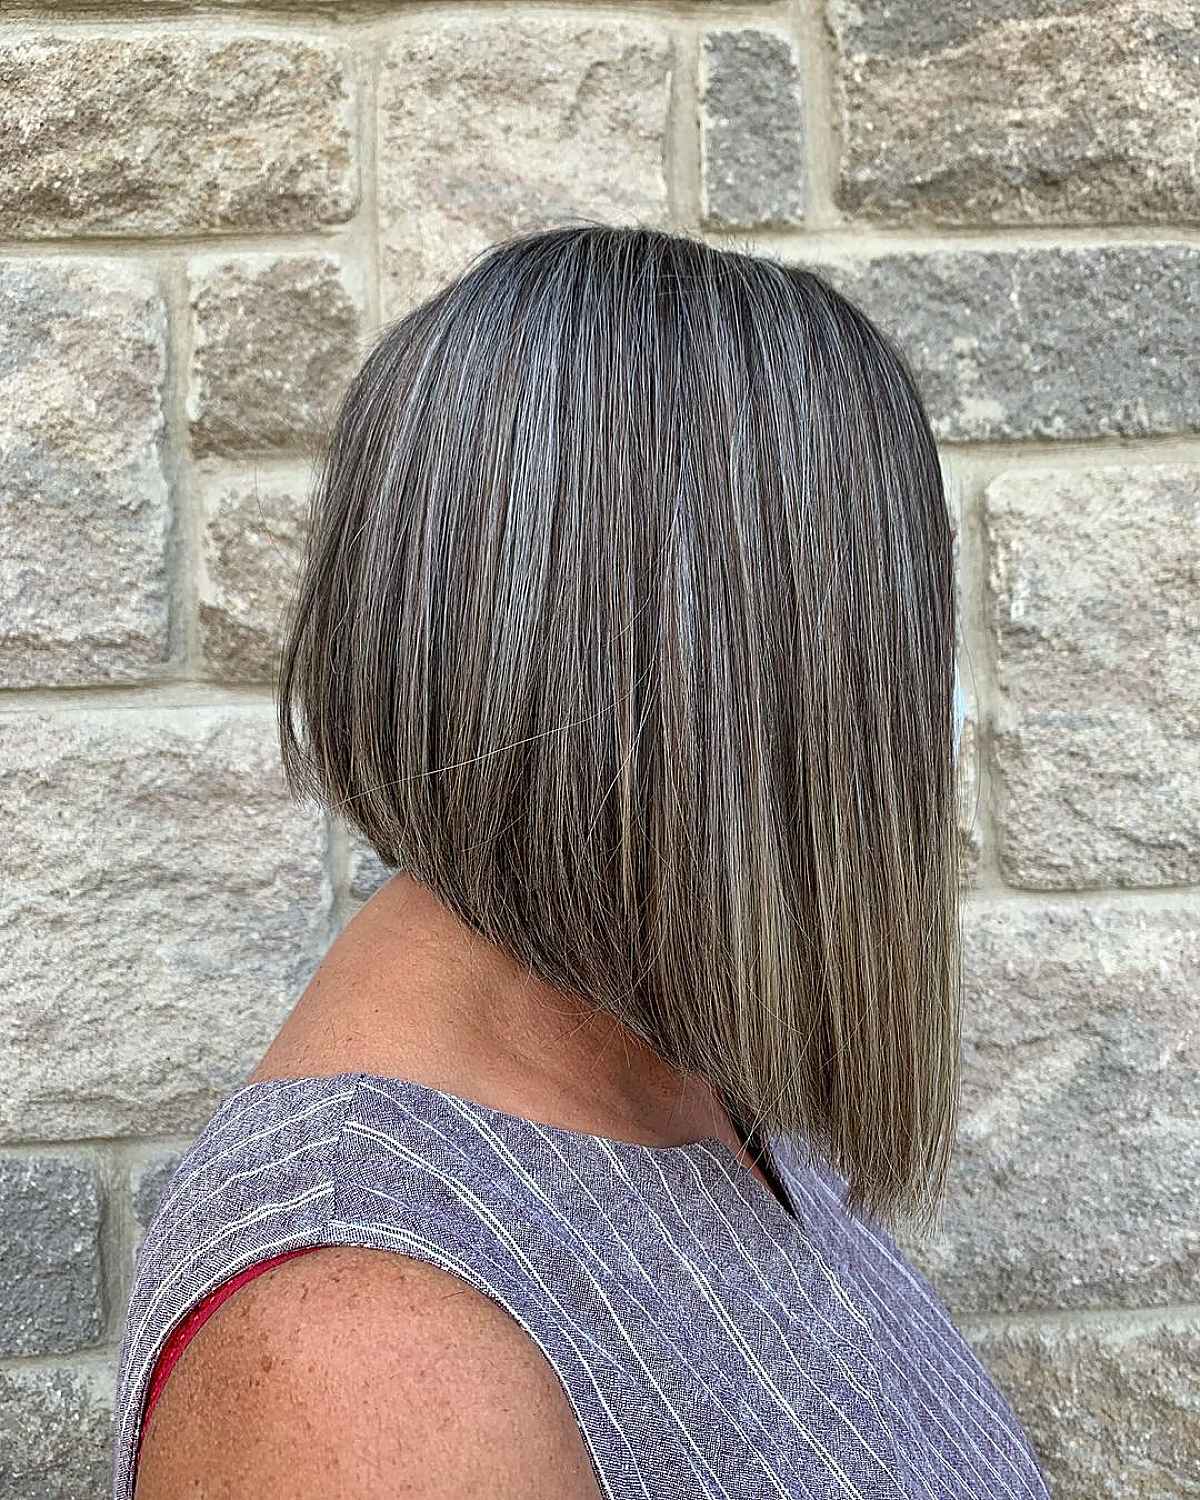 Long Angled Bob Hairstyle for a woman in her sixties